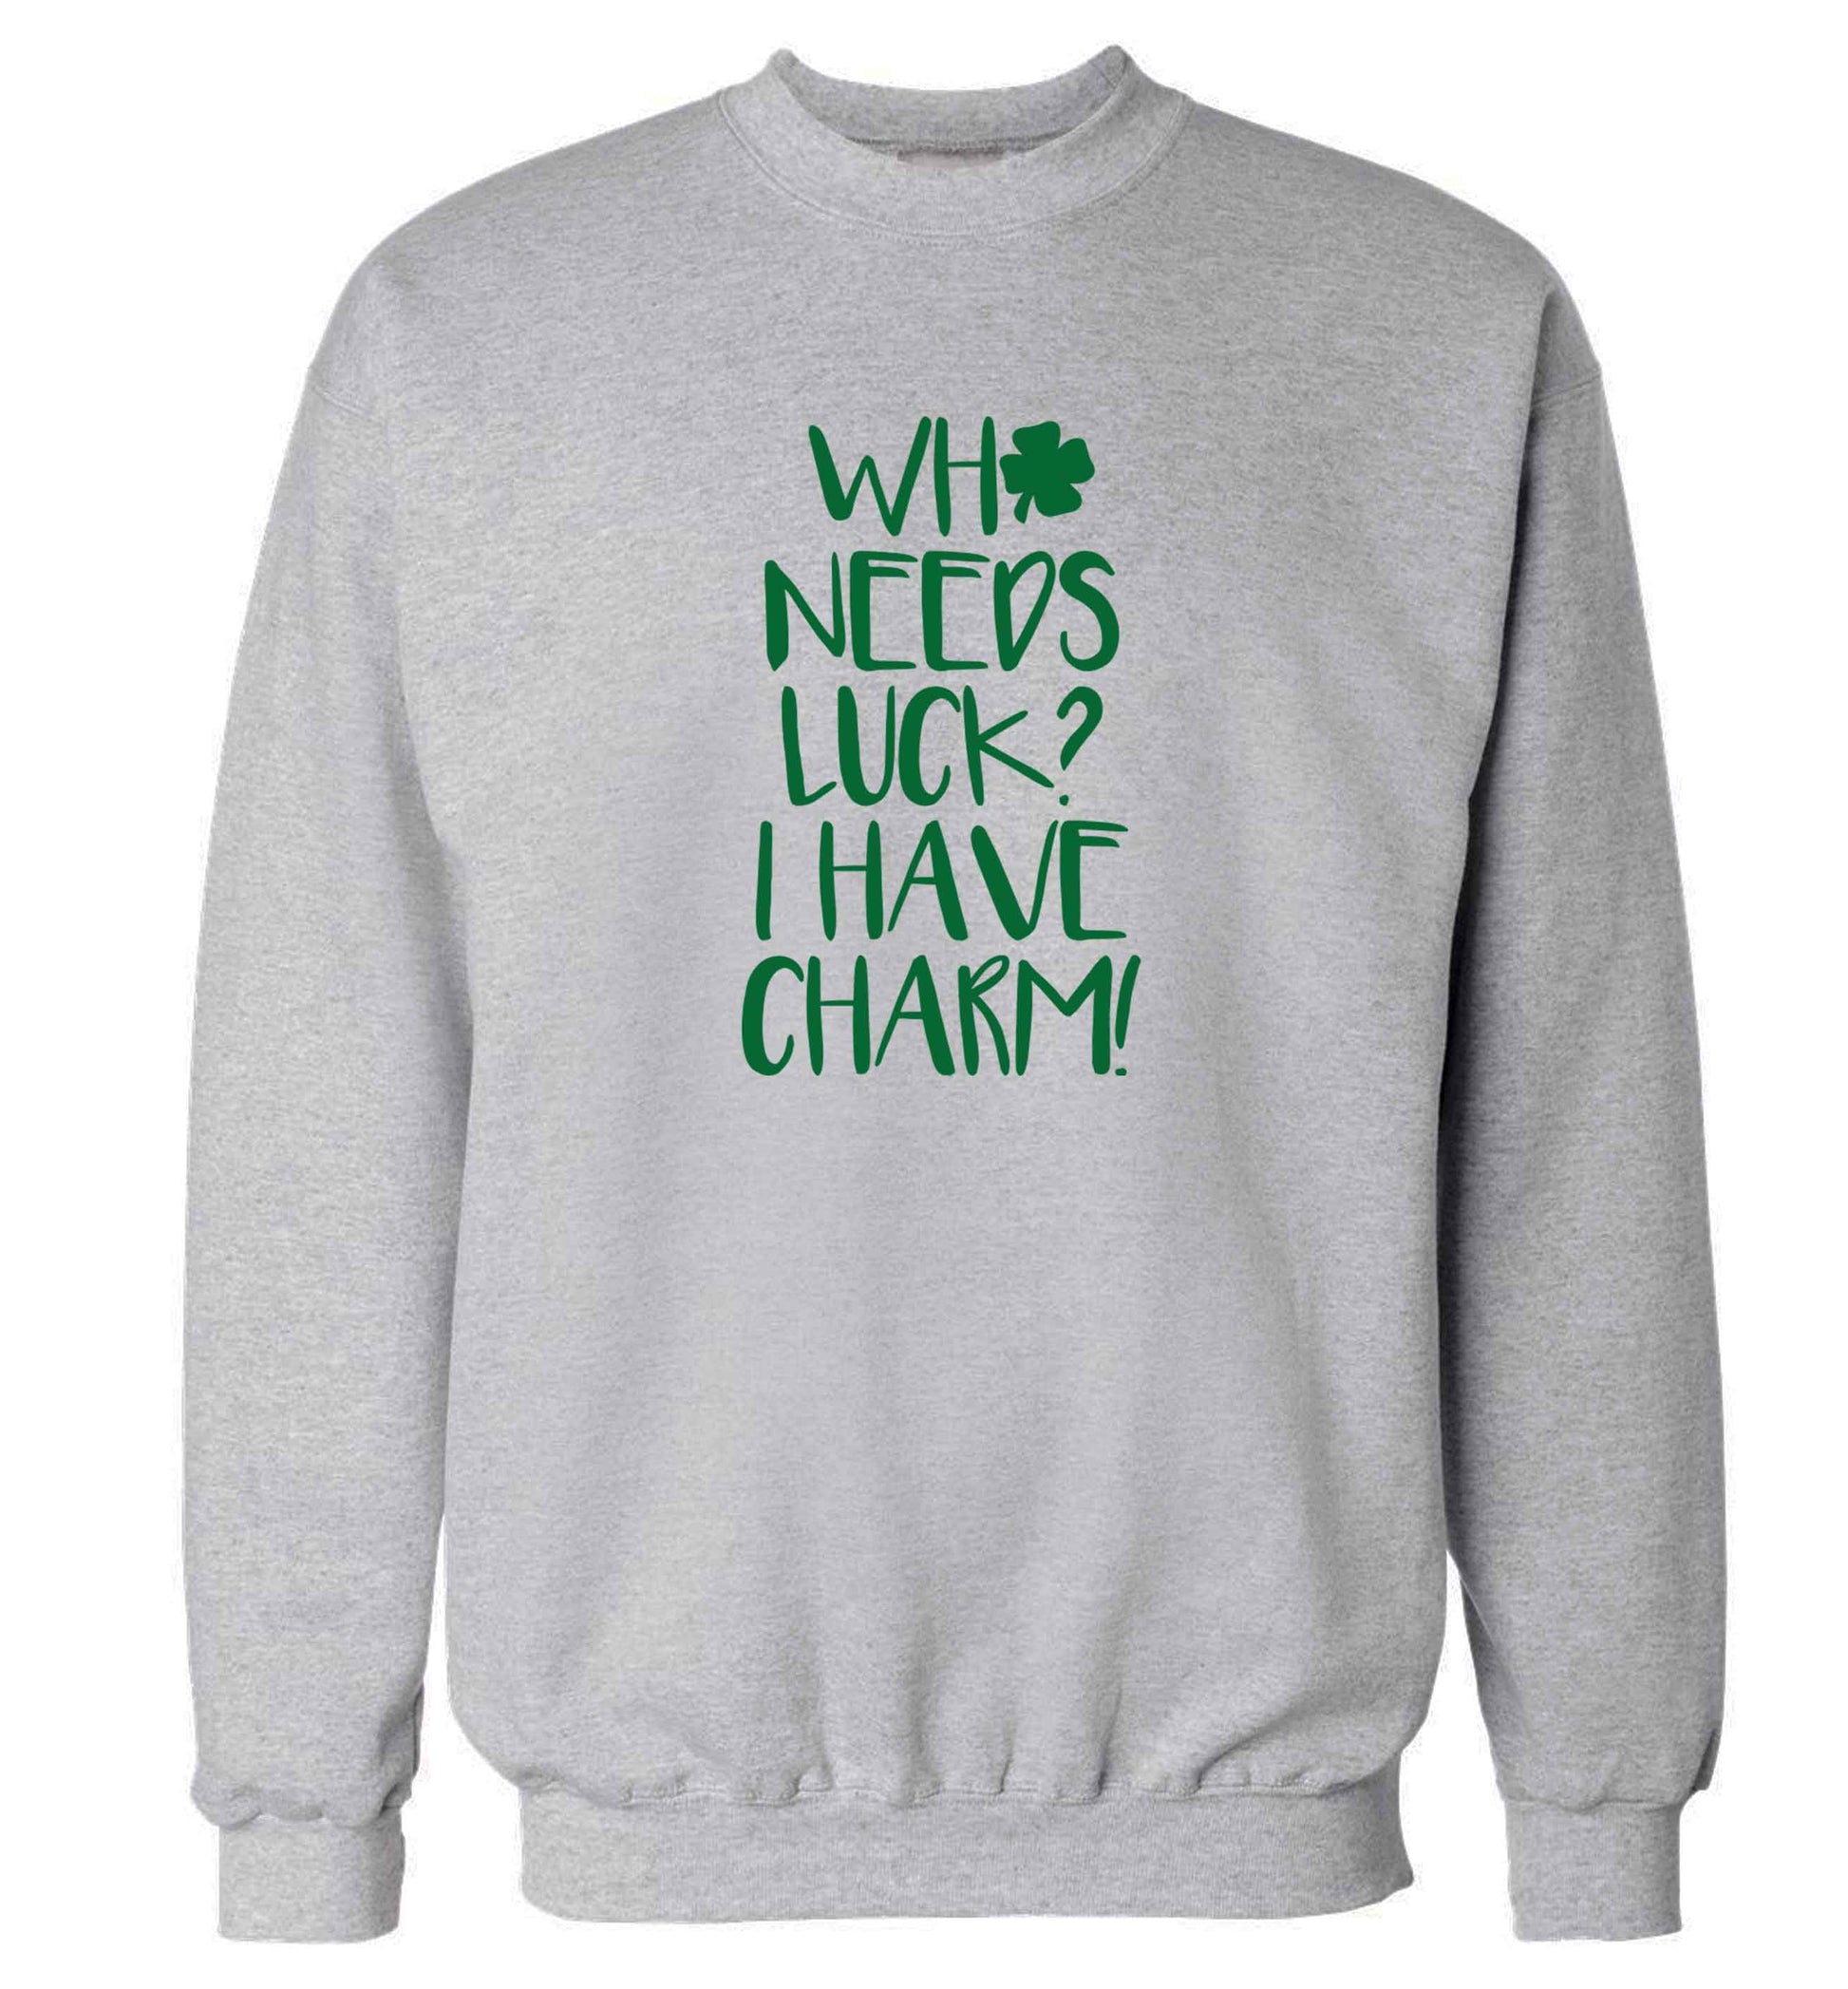 Who needs luck? I have charm! adult's unisex grey sweater 2XL